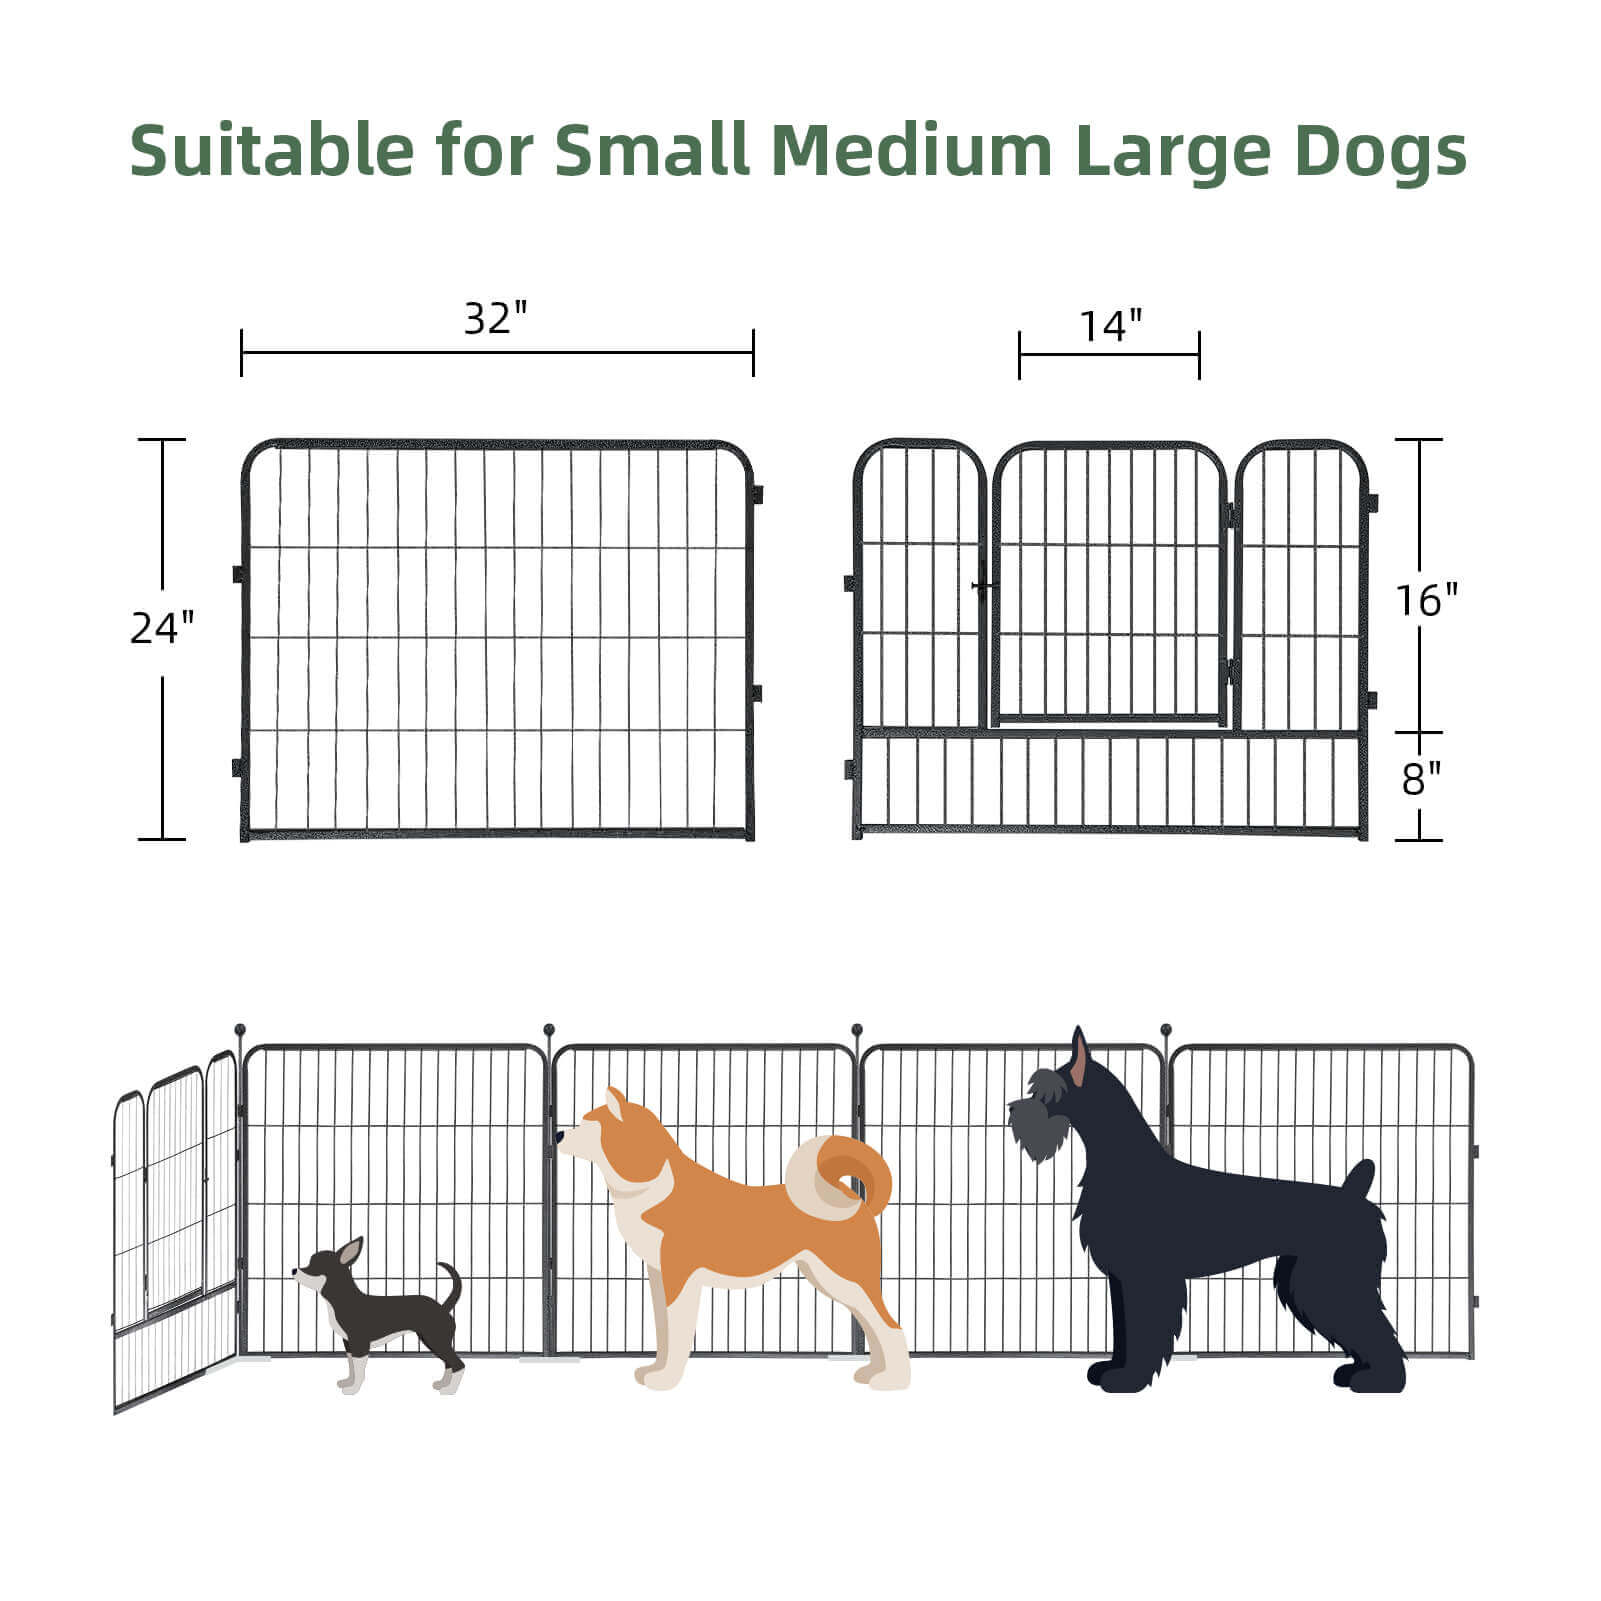 Elecwish High-Security Pet Fences is suitable for small medium large dogs